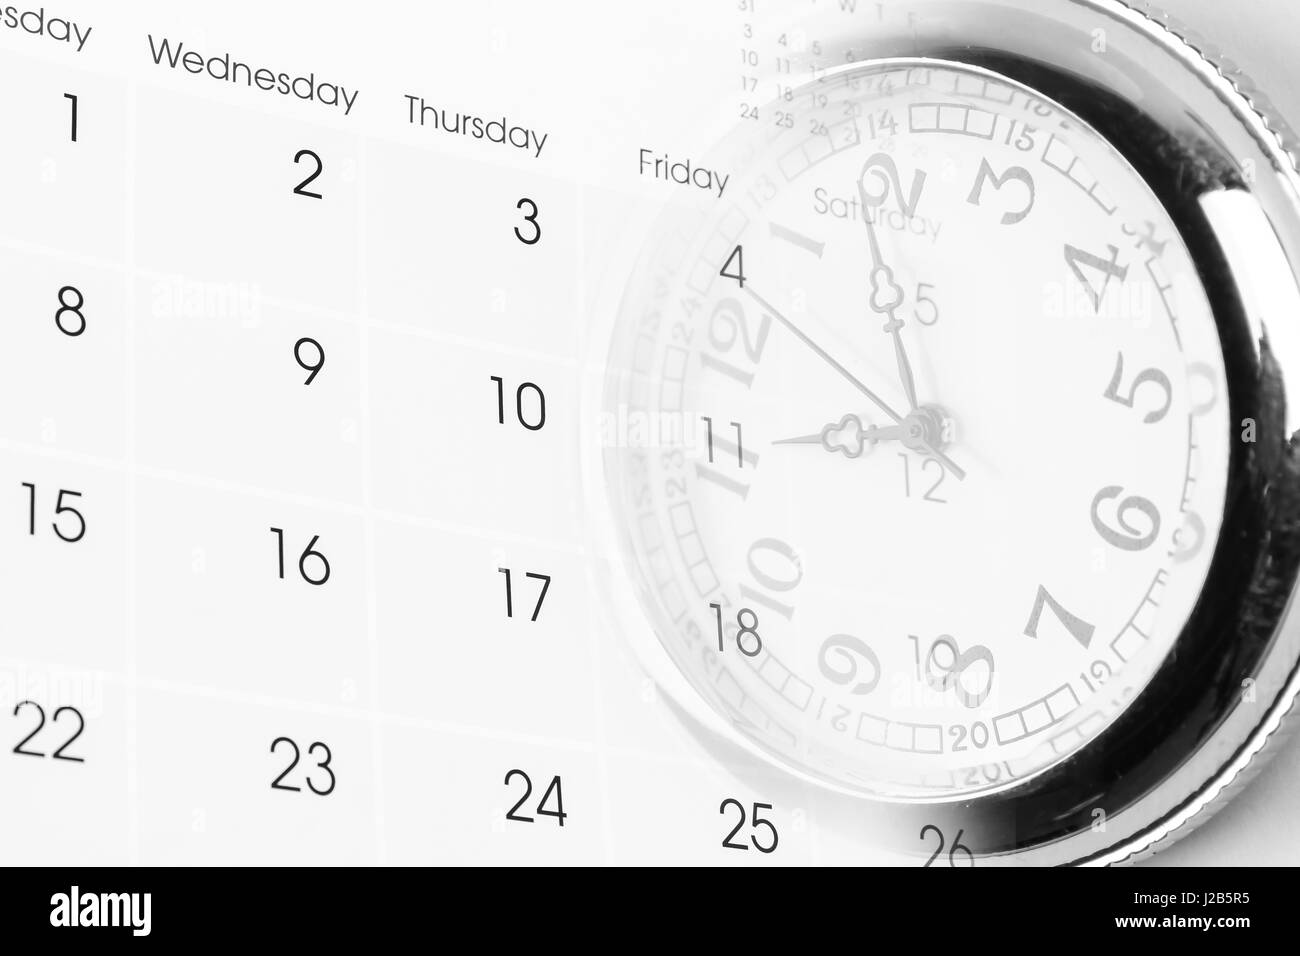 Watch on calendar page numbers Stock Photo